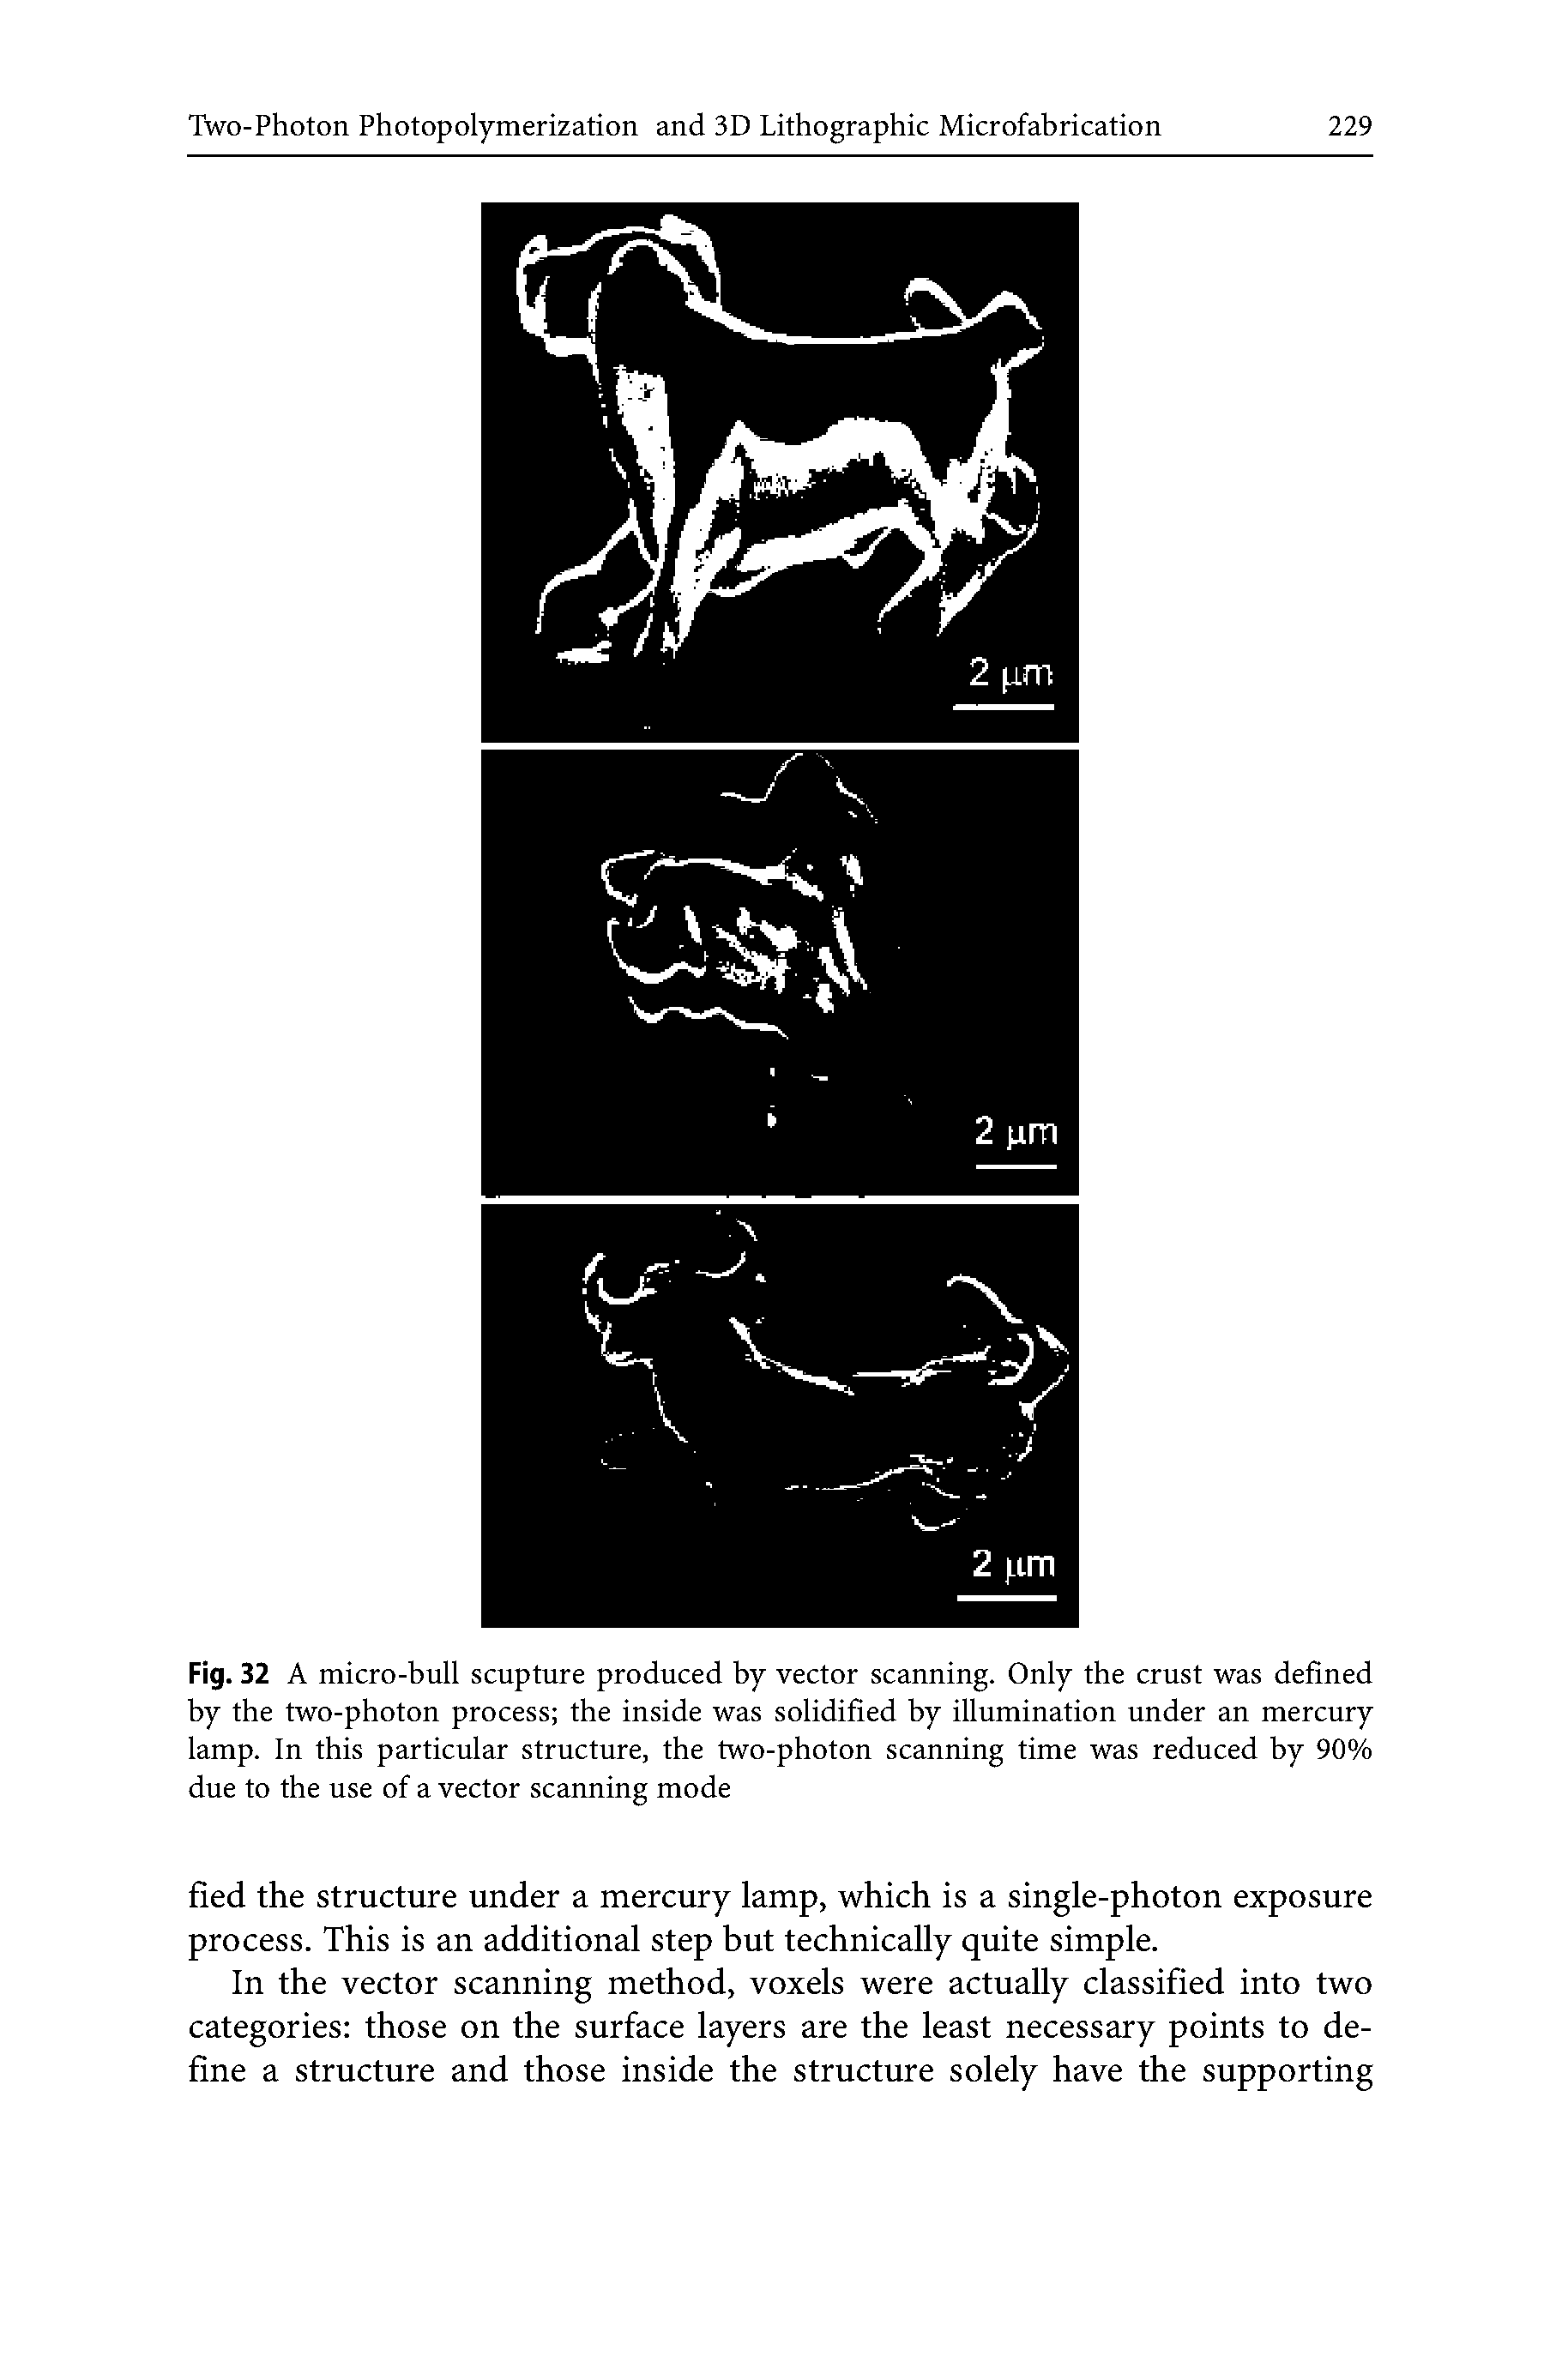 Fig. 32 A micro-bull scupture produced by vector scanning. Only the crust was defined by the two-photon process the inside was solidified by illumination under an mercury lamp. In this particular structure, the two-photon scanning time was reduced by 90% due to the use of a vector scanning mode...